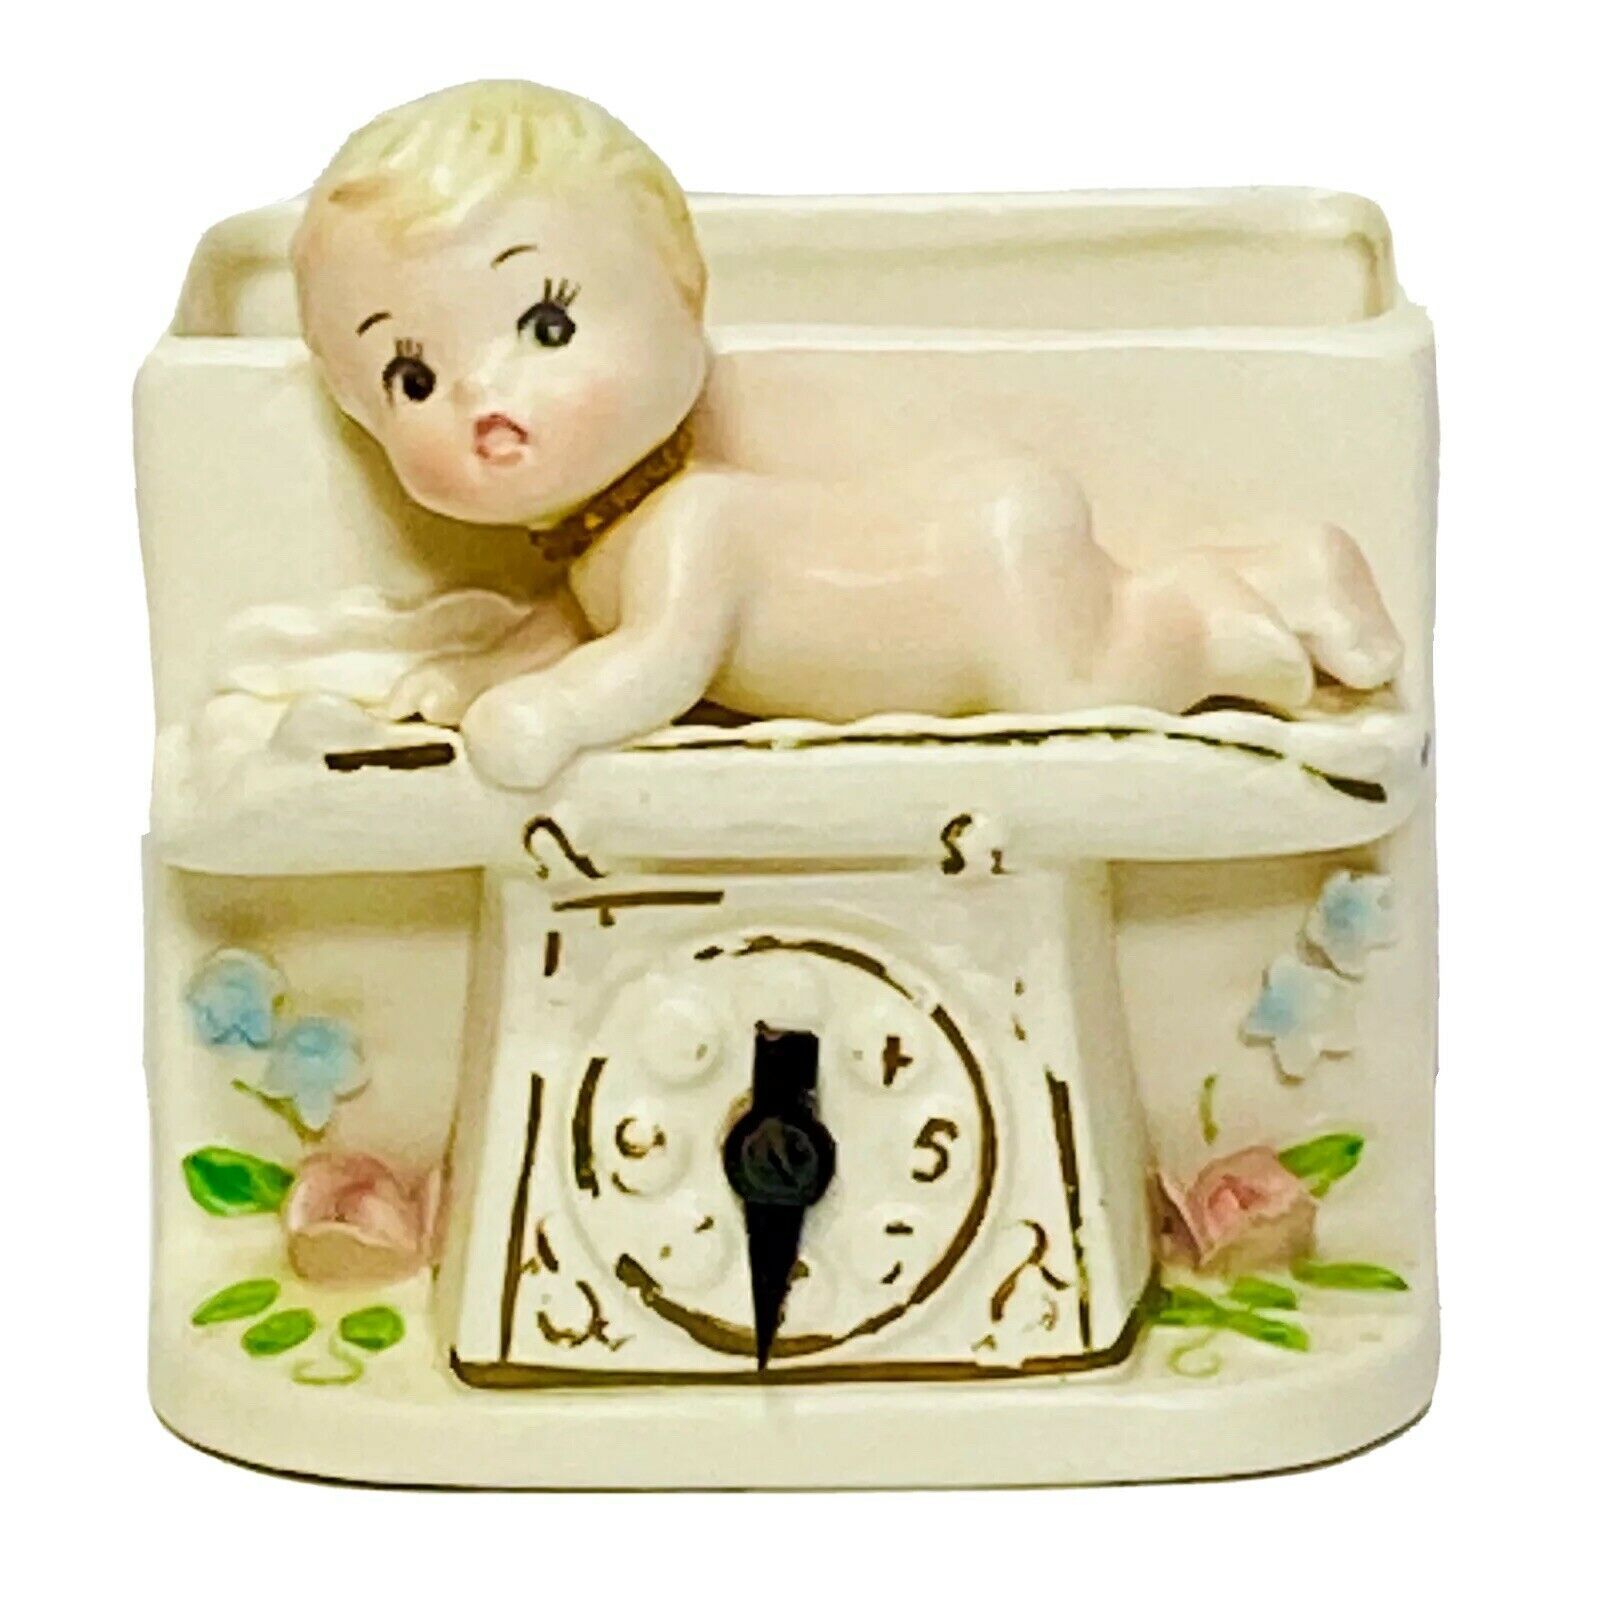 VTG Napco Baby on Weight Scale Dial Moves Ceramic Planter Nursery Décor Japan - $16.94